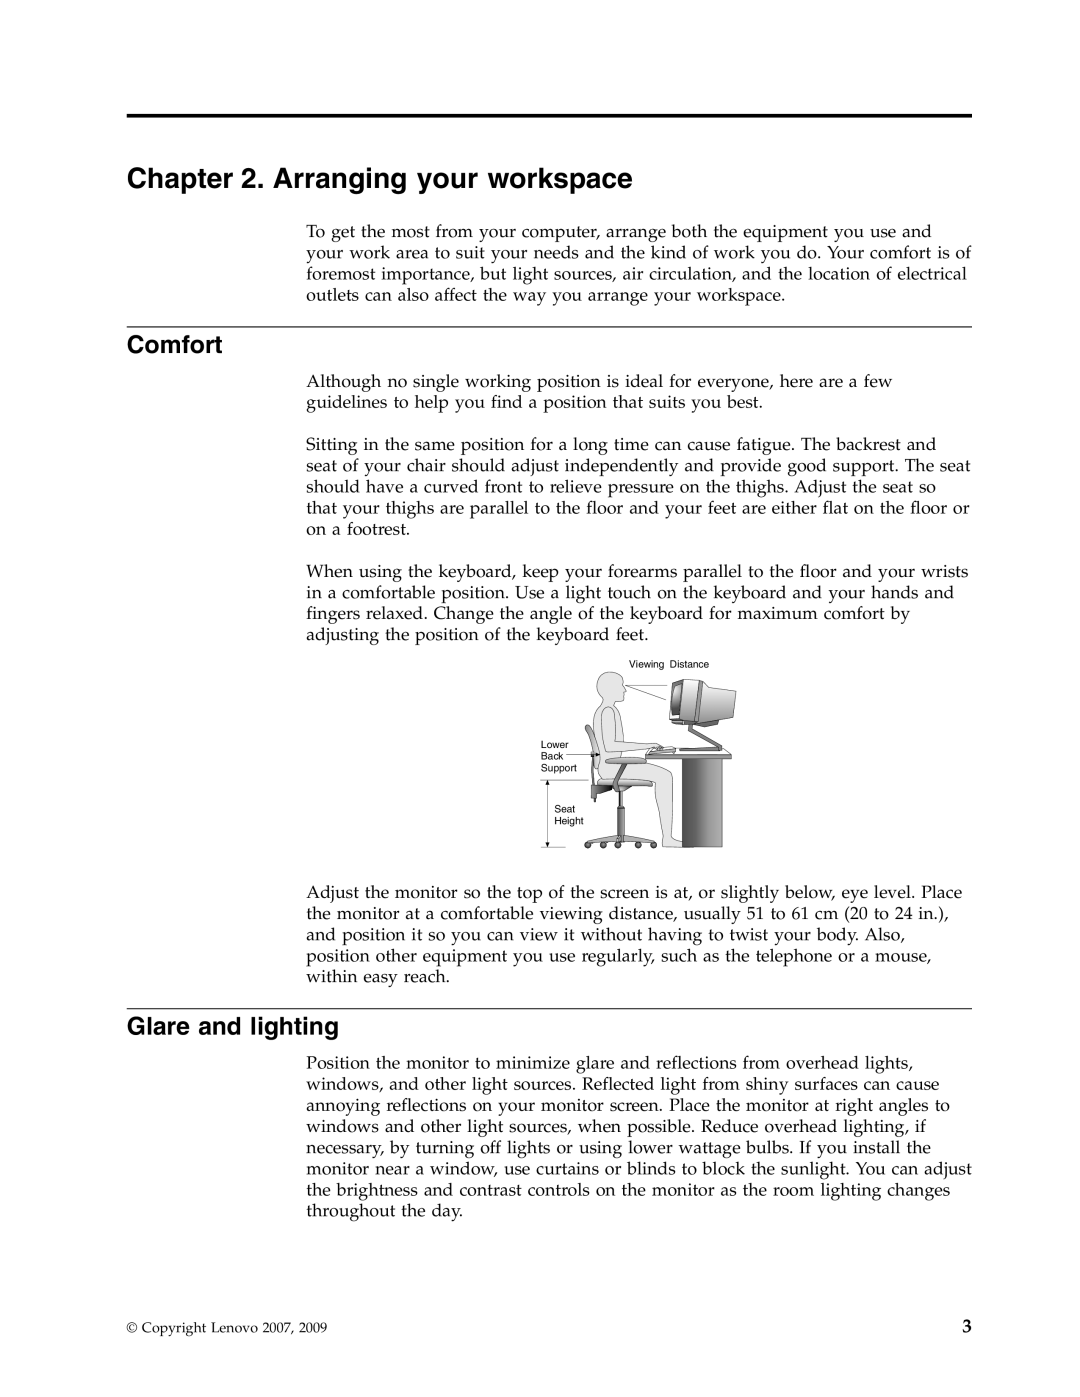 Lenovo 6019 manual Arranging your workspace, Comfort, Glare and lighting 